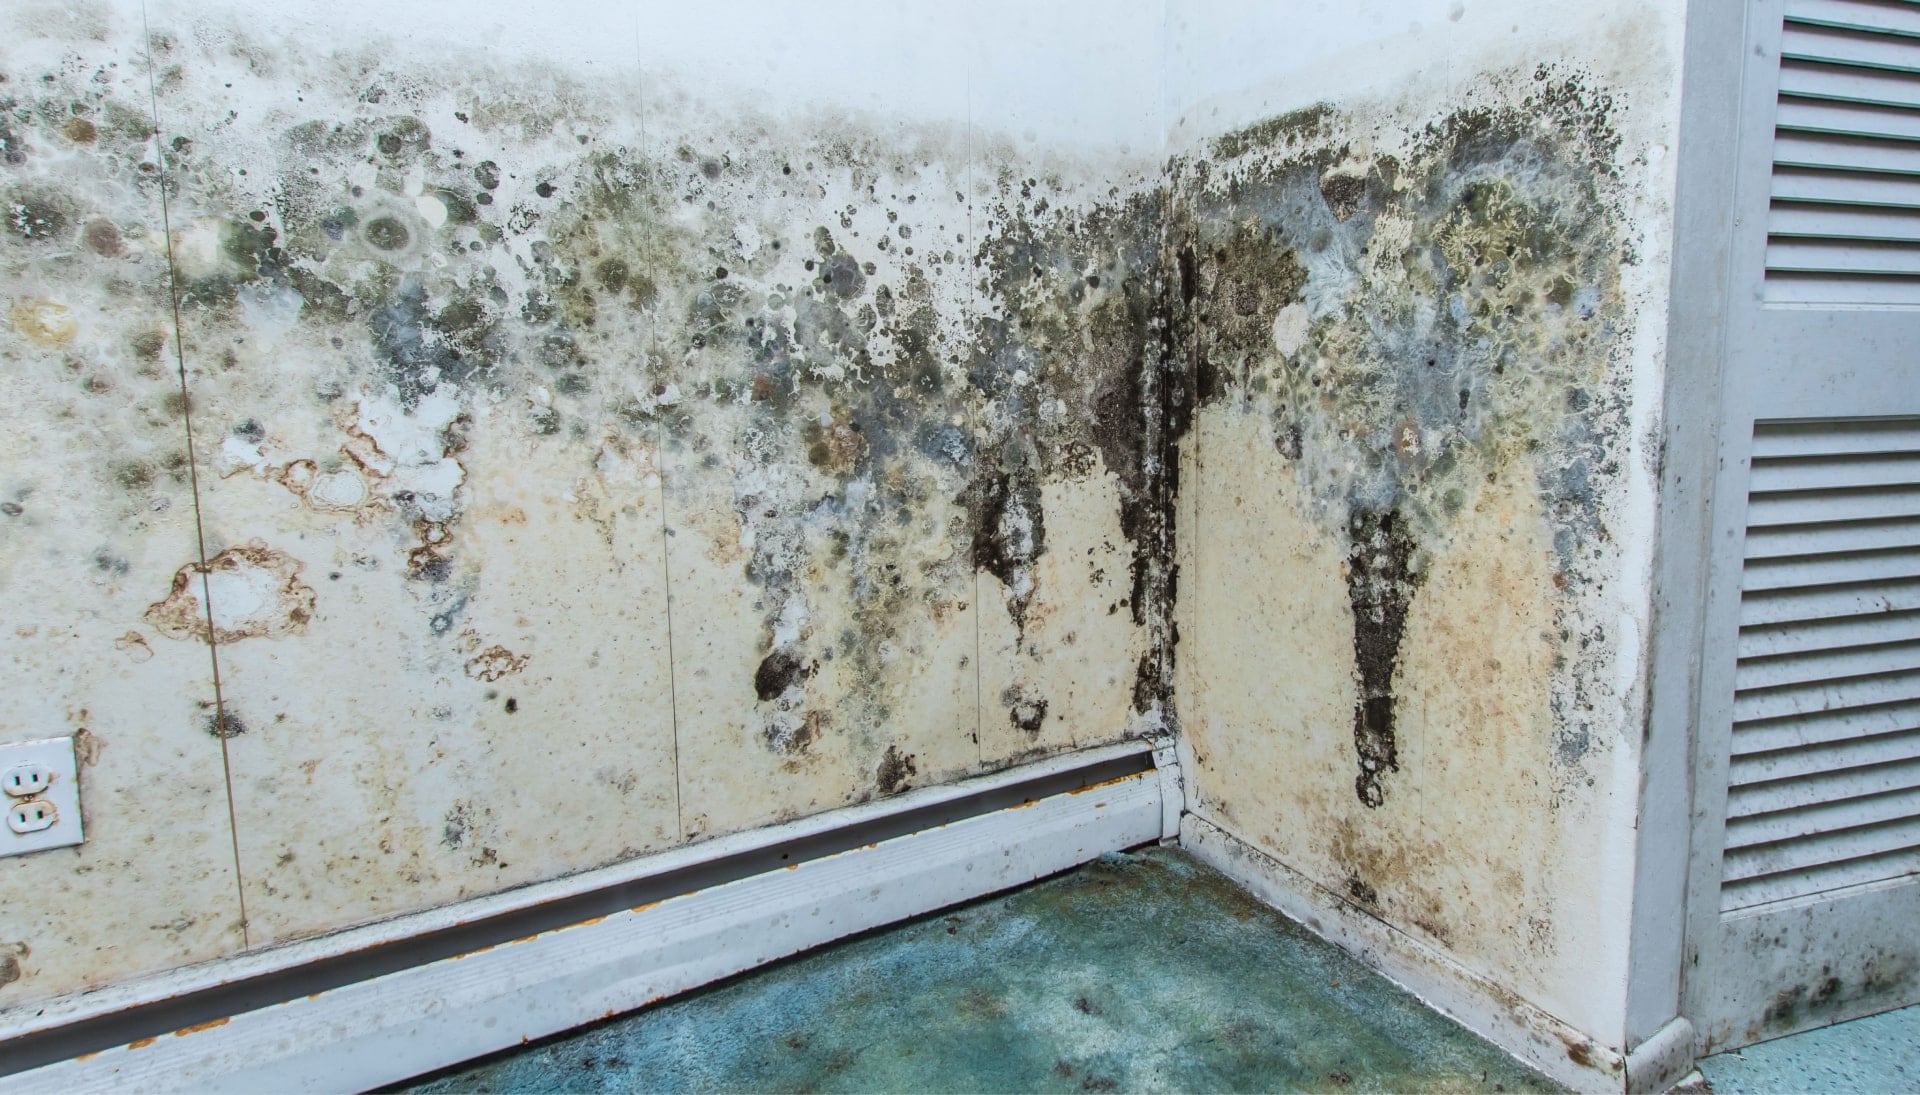 Professional mold removal, odor control, and water damage restoration service in Caldwell, New Jersey.